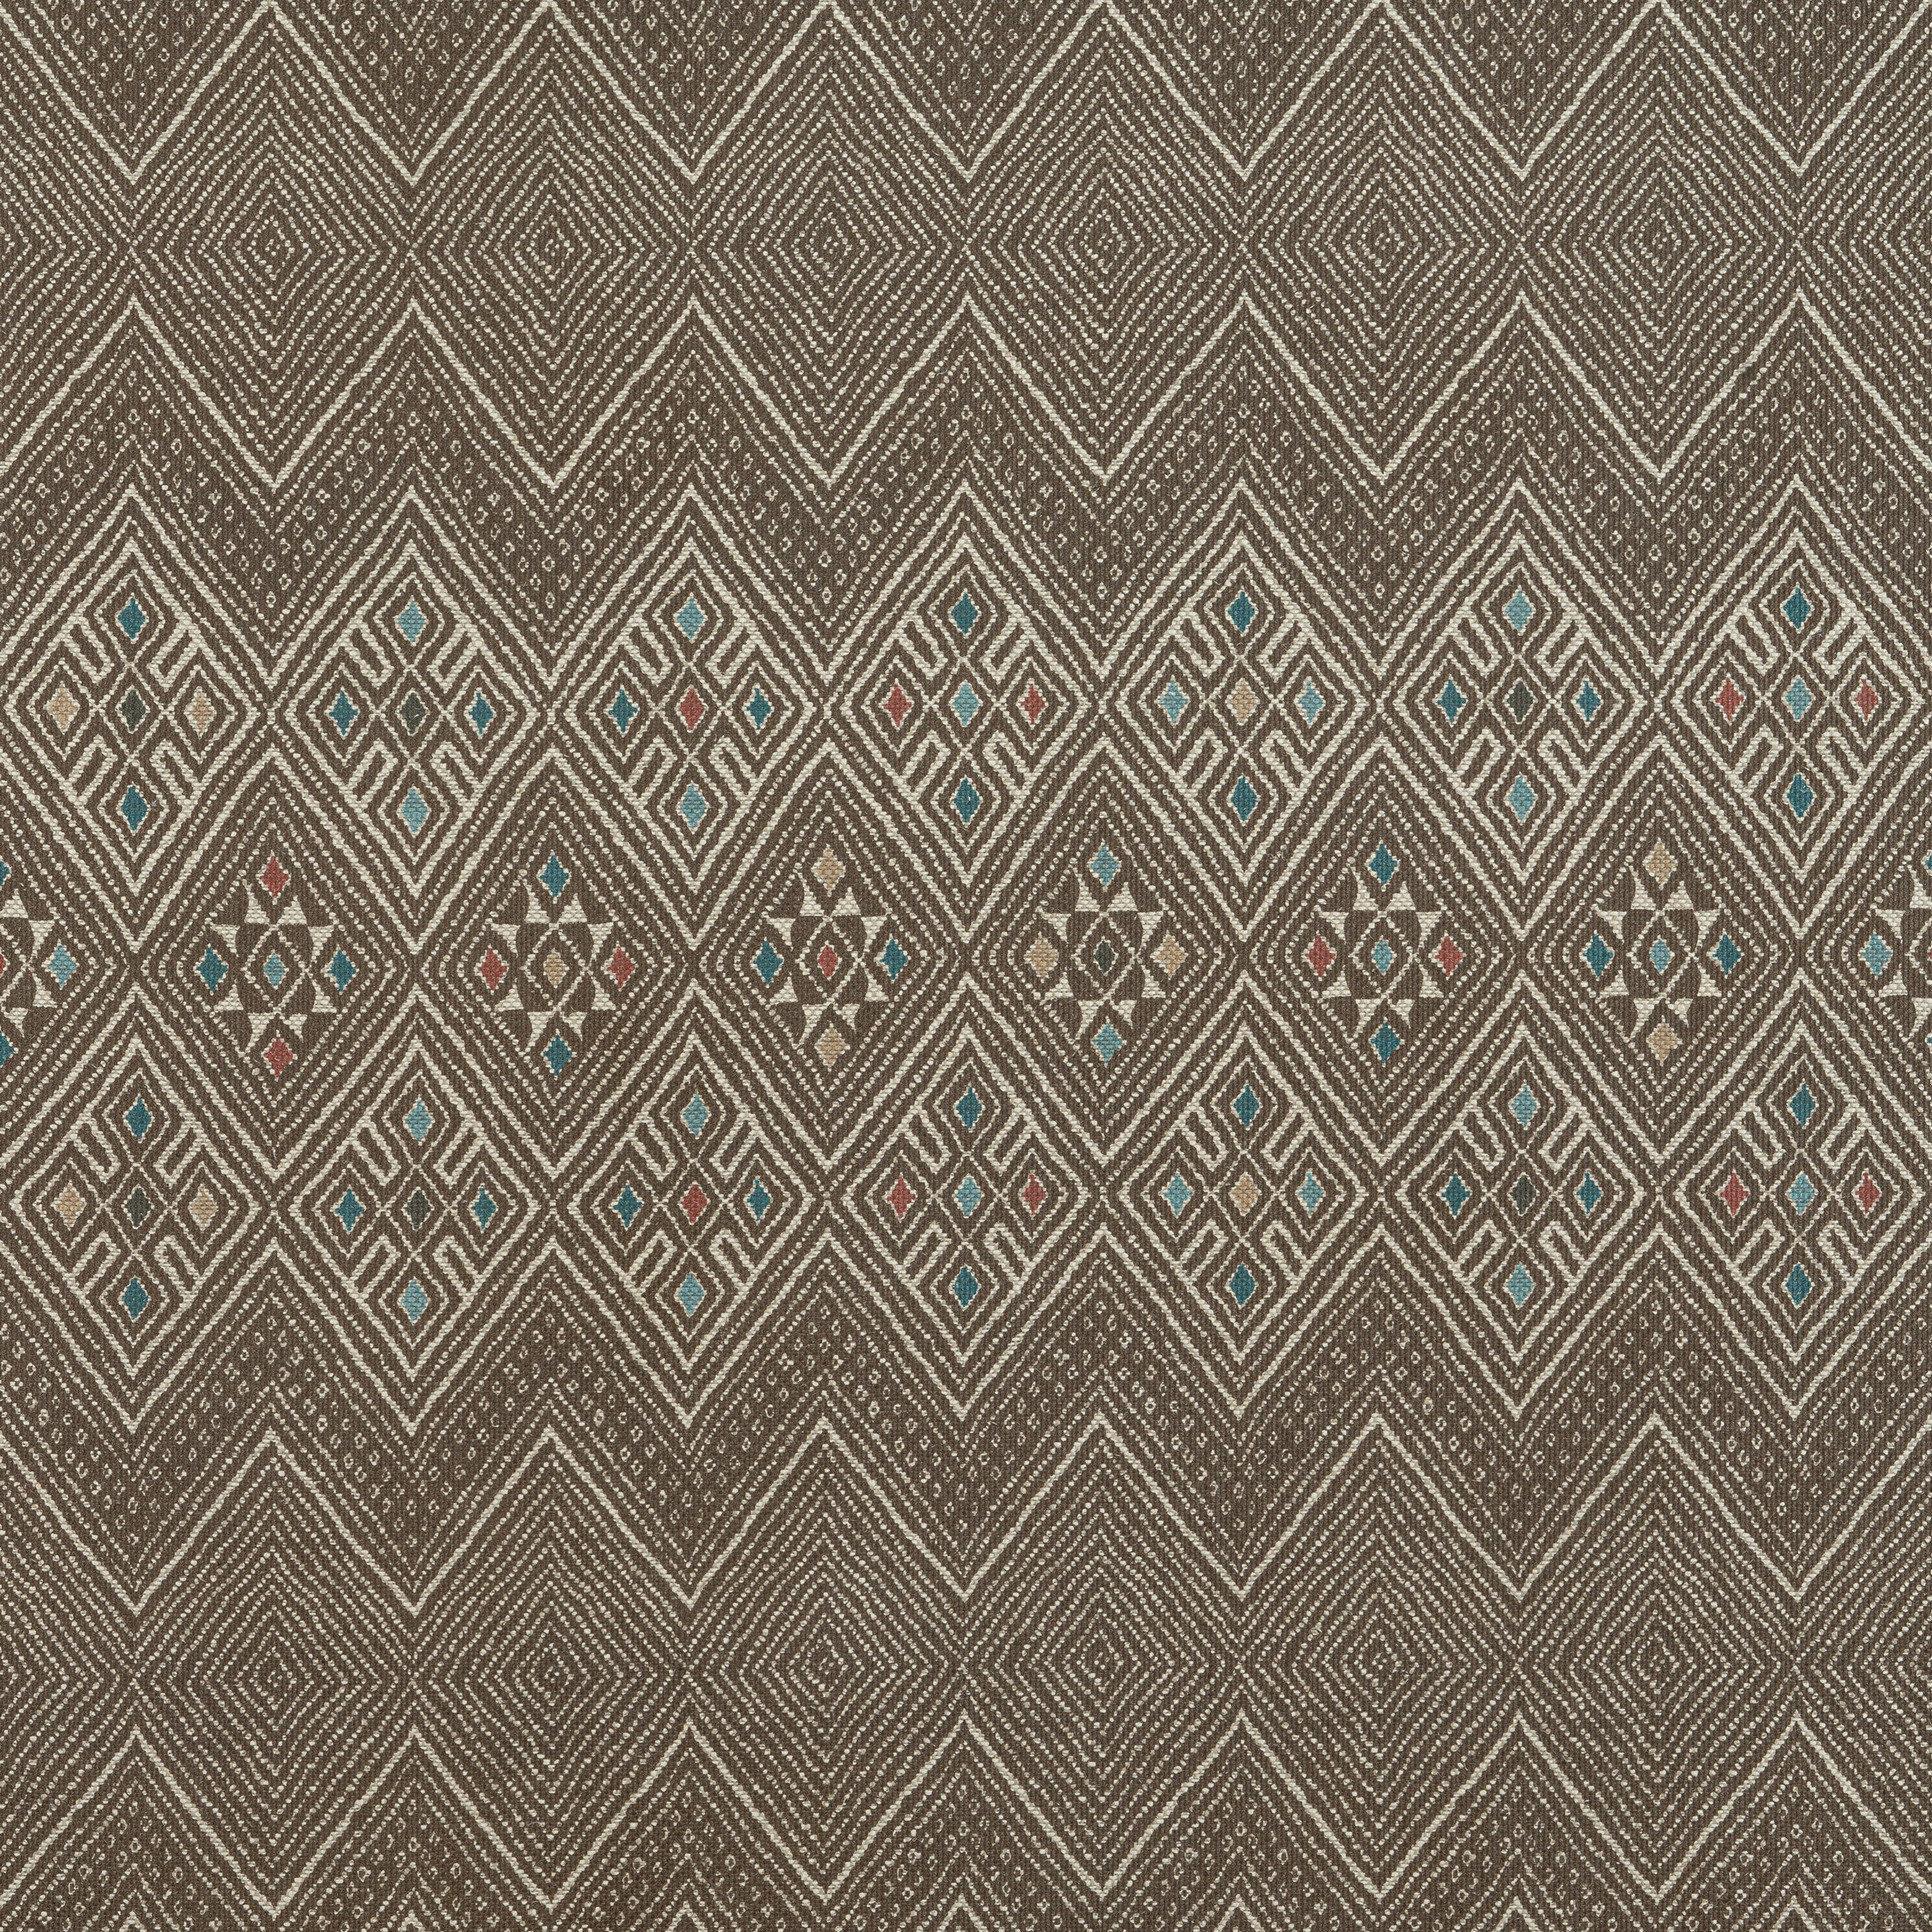 High Plains fabric in brown color - pattern number F913232 - by Thibaut in the Mesa collection